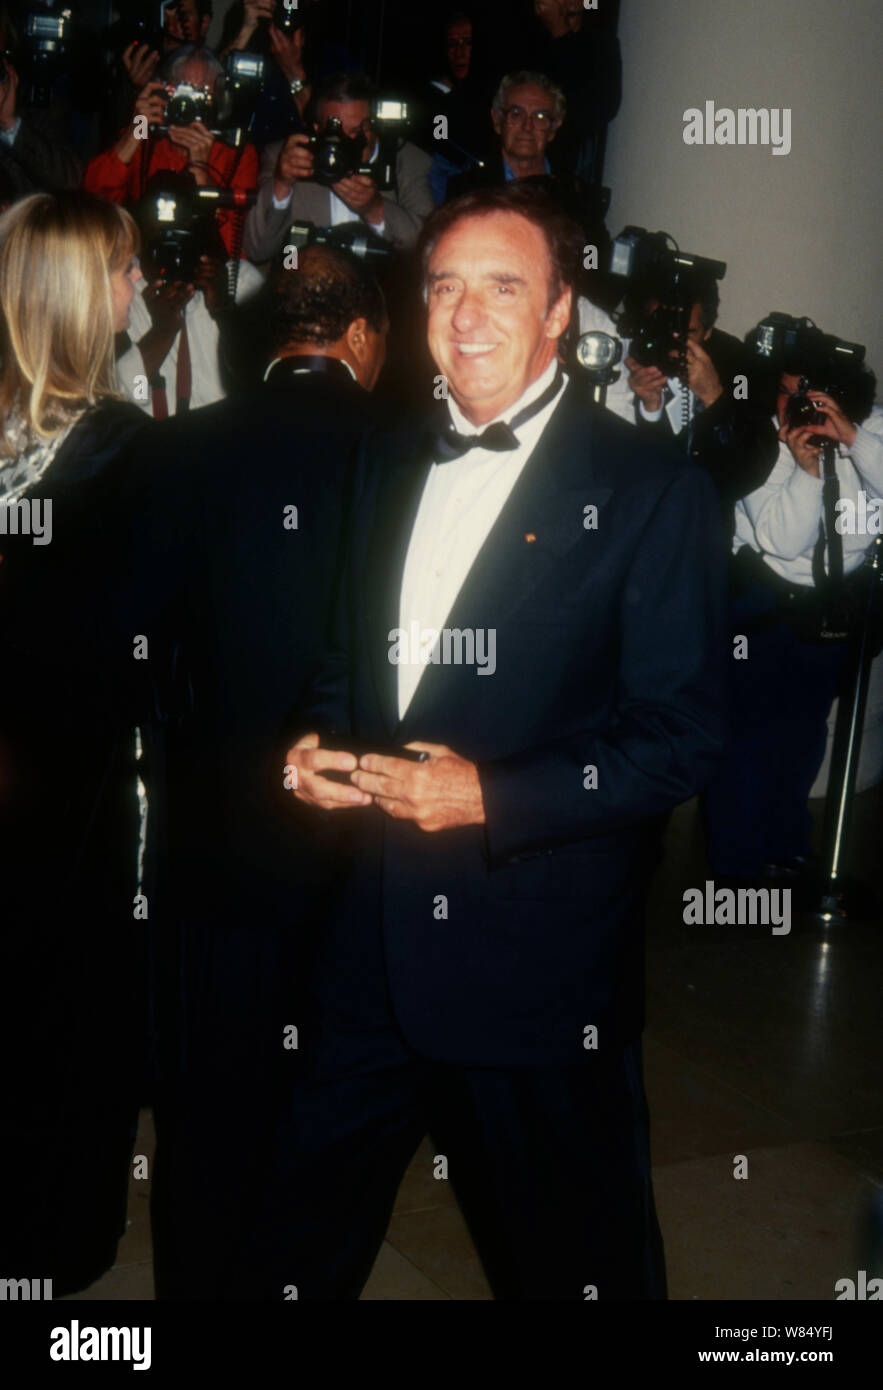 Beverly Hills, California, USA 28th October 1994 Actor Jim Nabors attends the 1994 Carousel of Hope Ball to Benefit the Barbara Davis Center for Childhood Diabetes on October 28, 1994 at the Beverly Hilton Hotel in Beverly Hills, California, USA. Photo by Barry King/Alamy Stock Photo Stock Photo